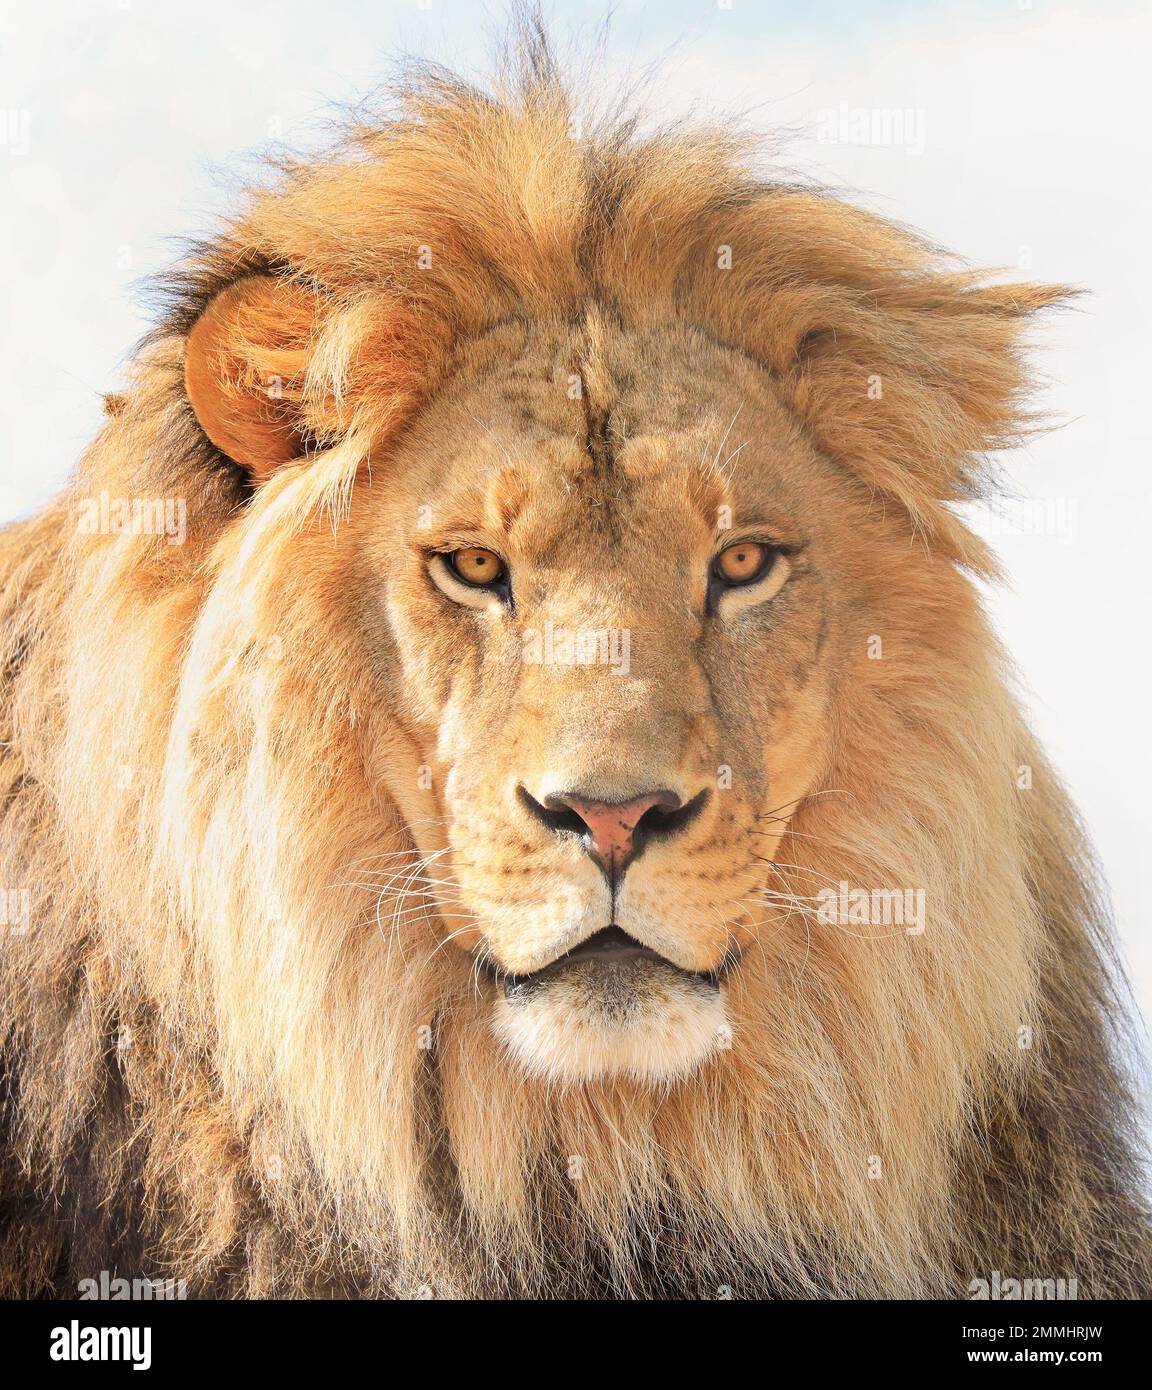 real lion head